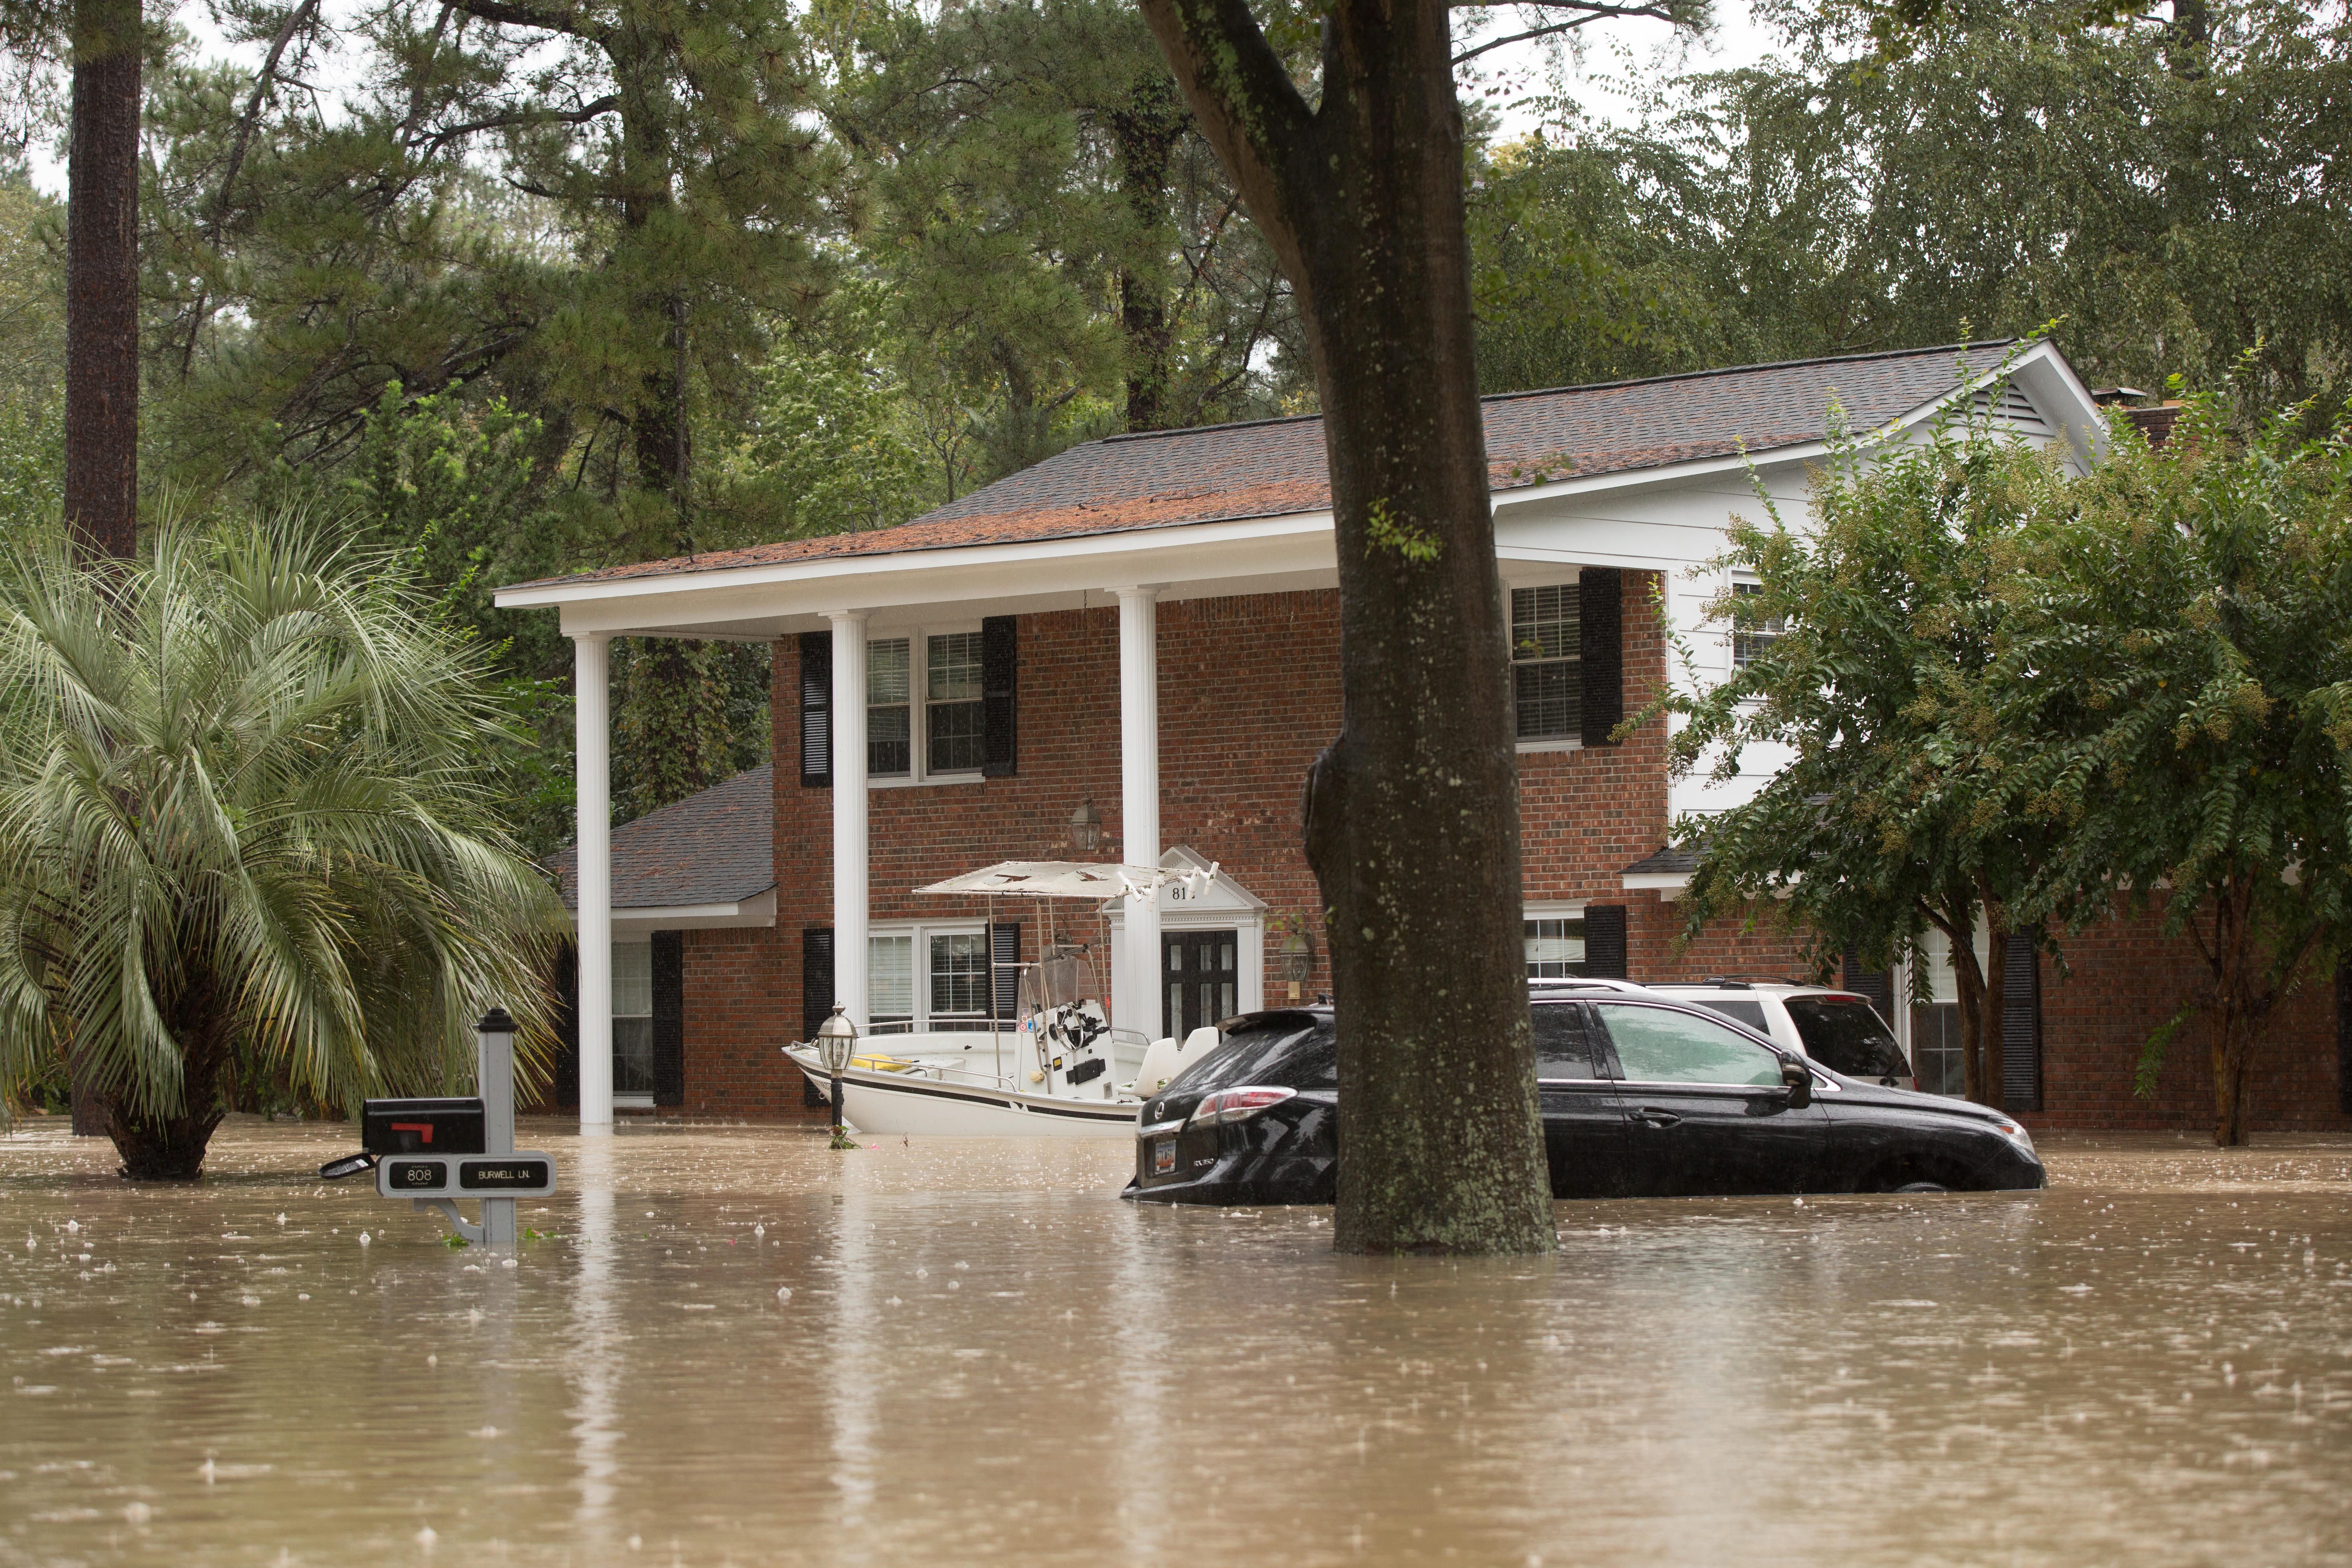 2015 flooding in Columbia